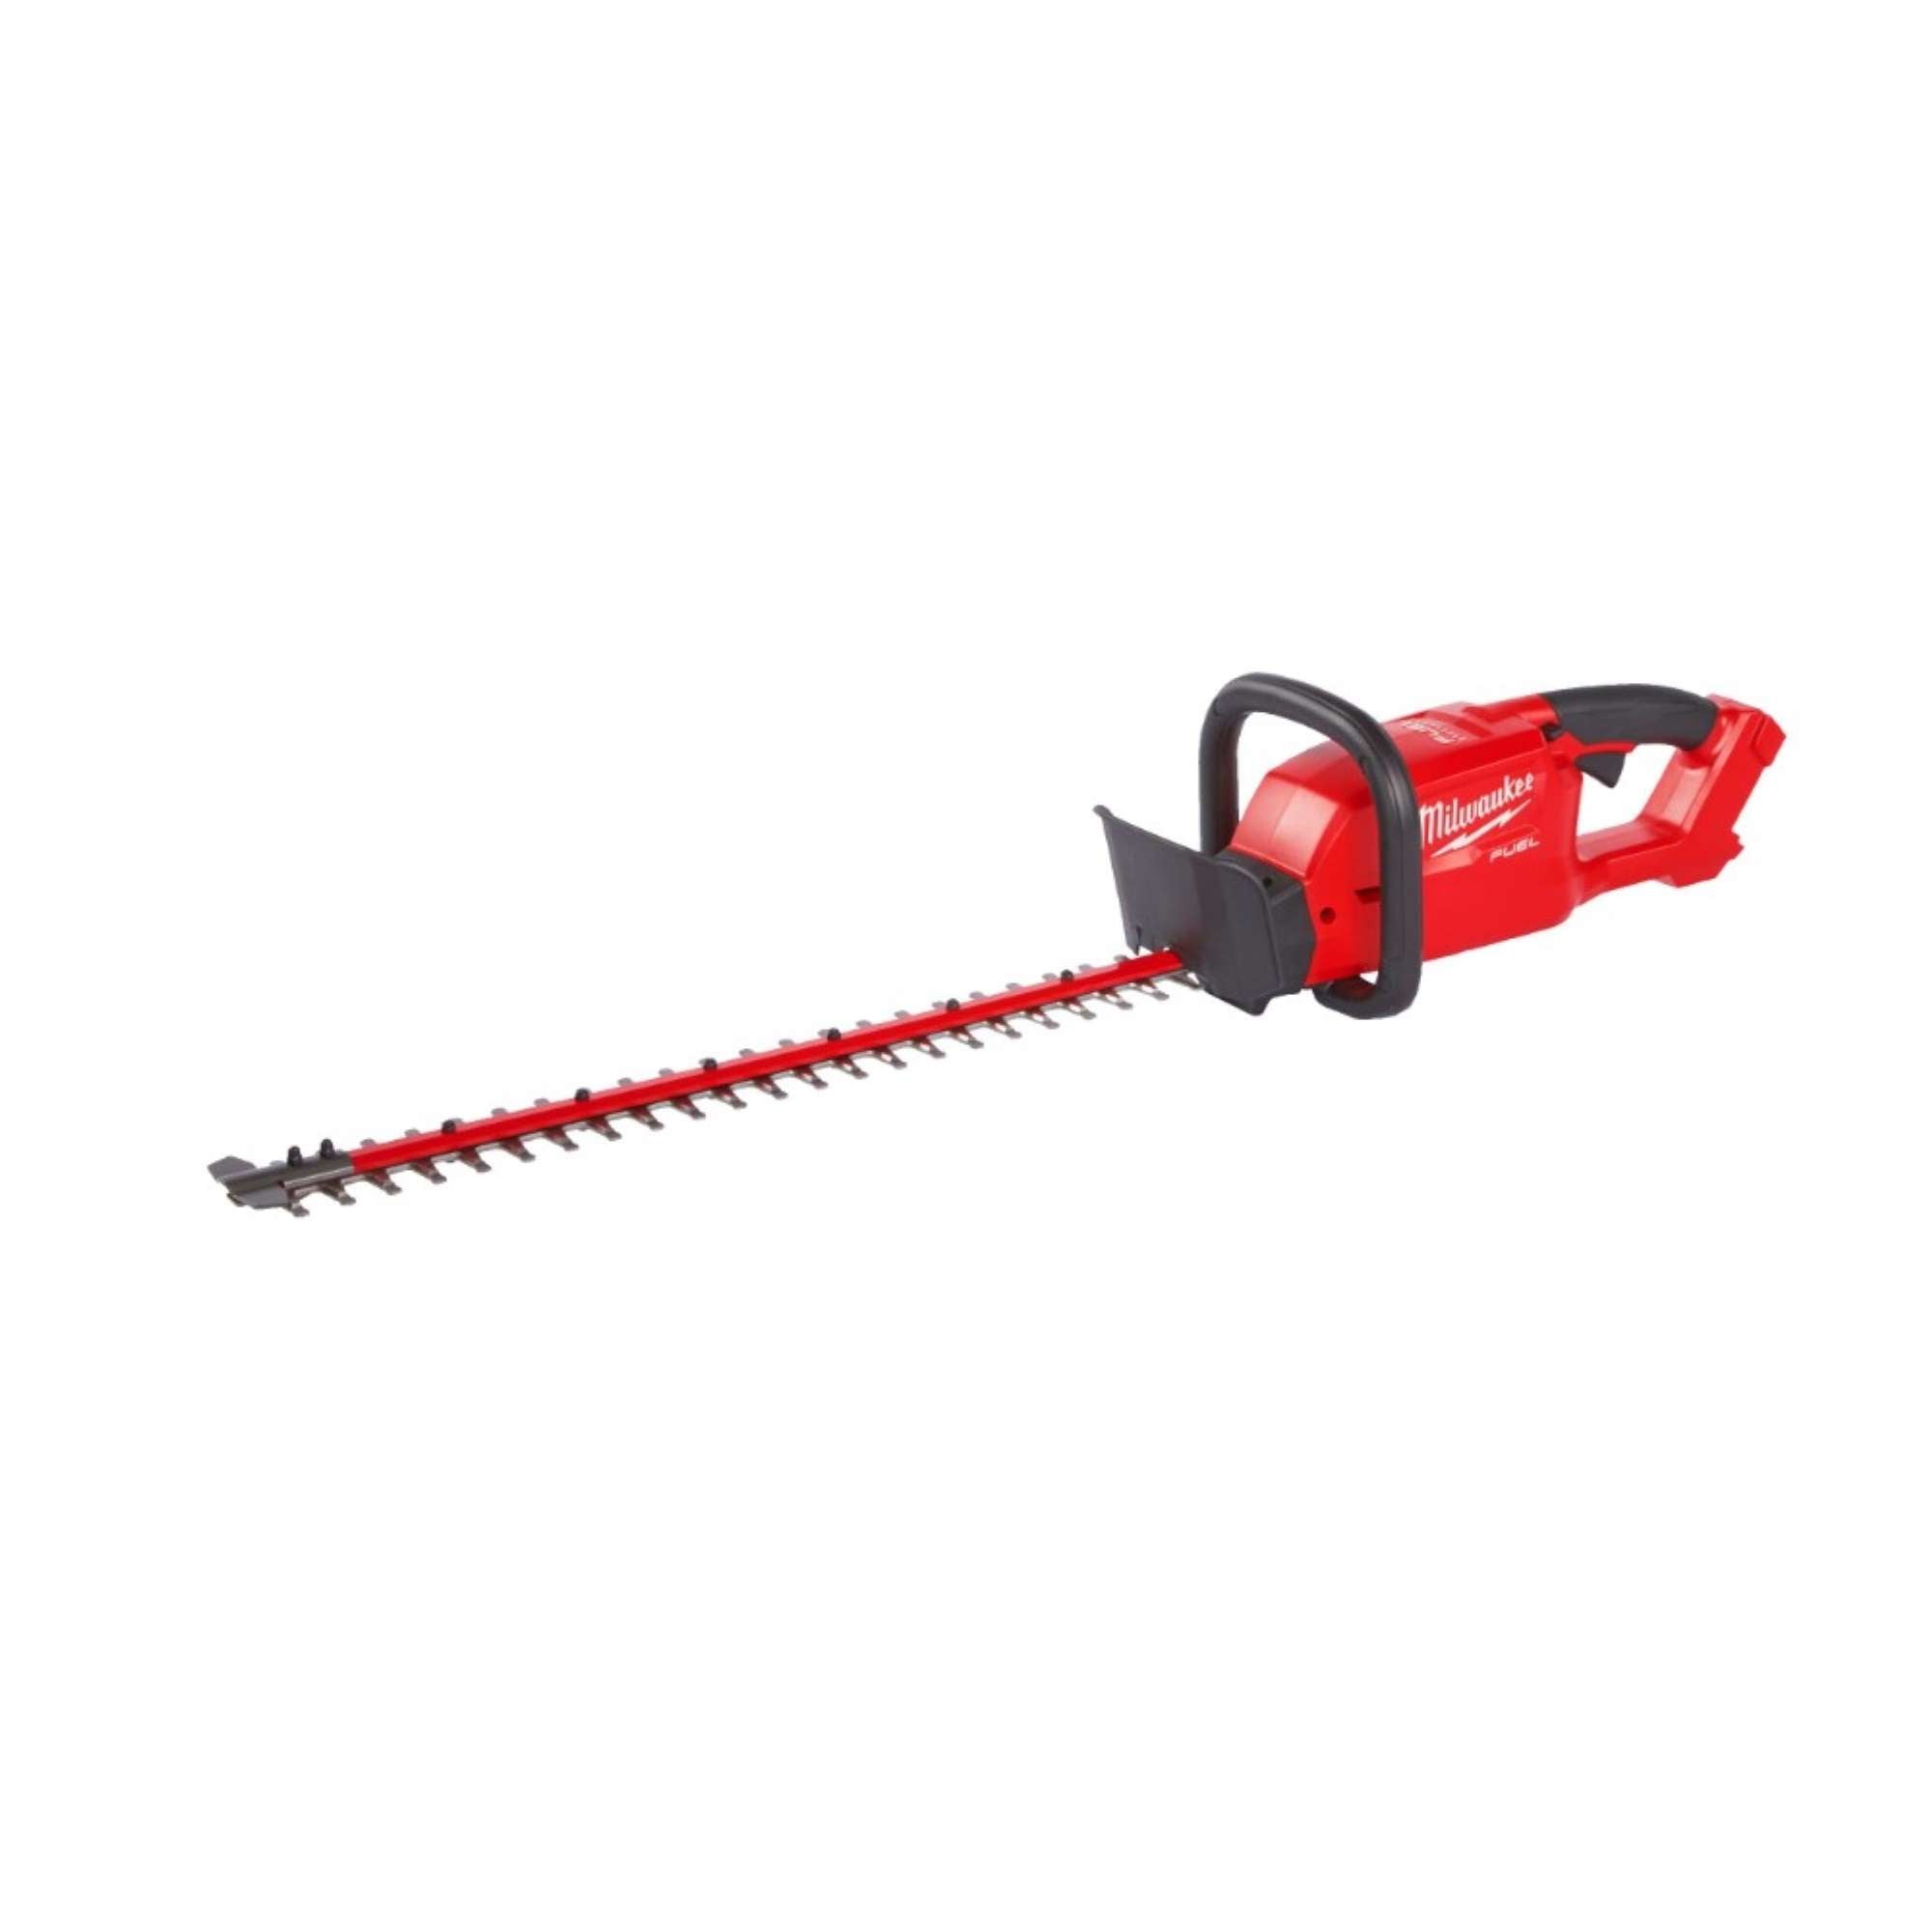 M18 Hedge Trimmer with 600mm Blade (bare tool) Milwaukee 4933459346